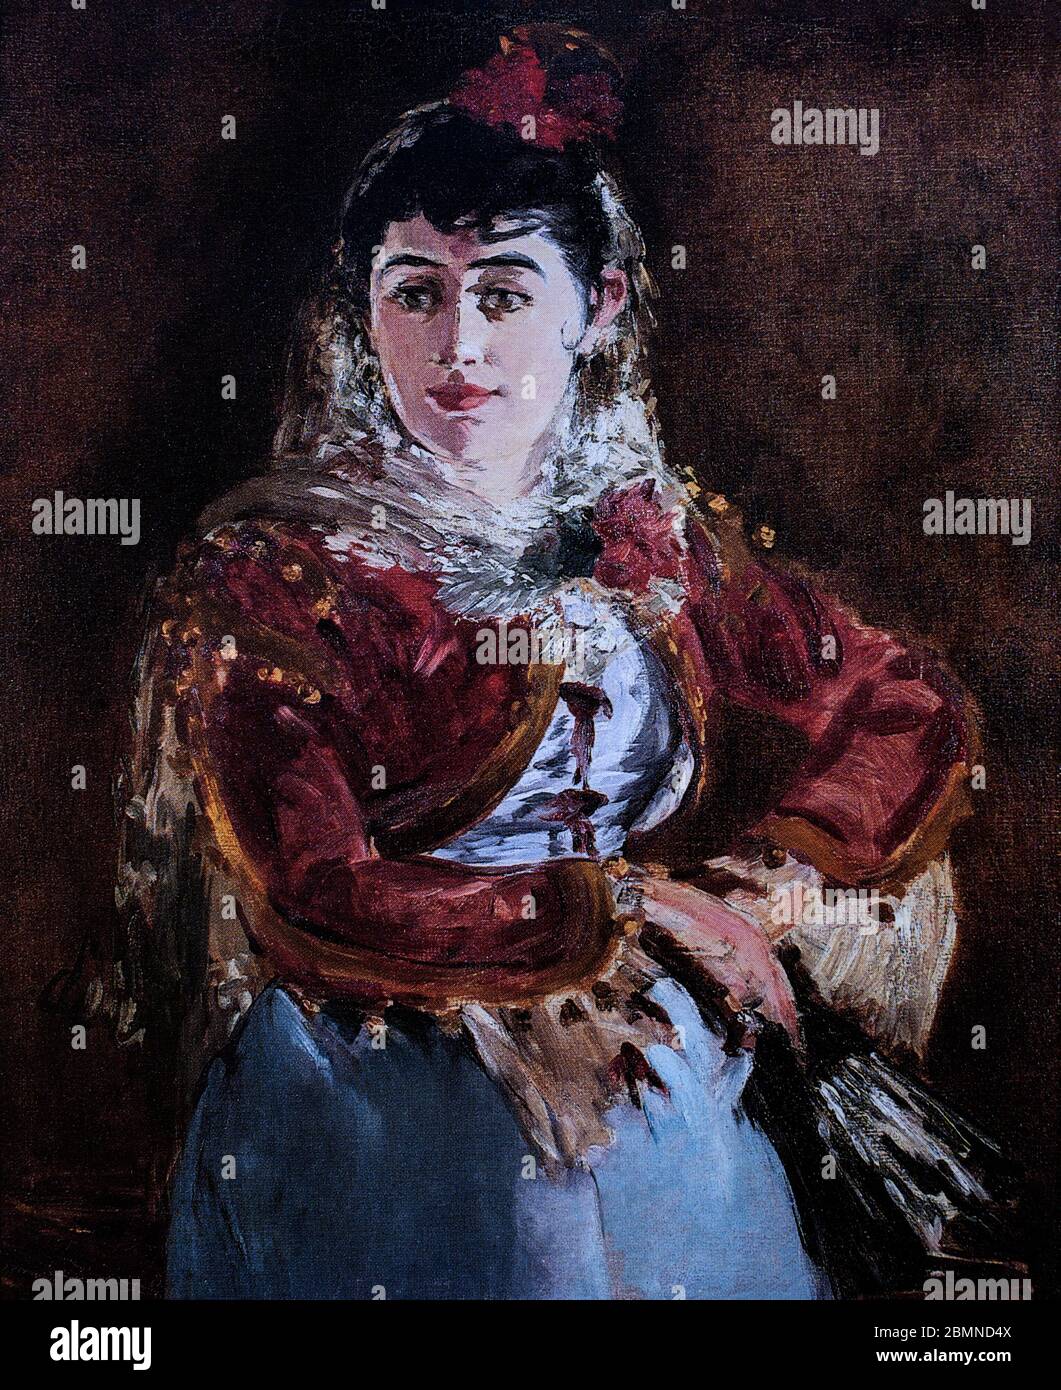 Portrait of Émilie Ambre as Carmen, painted in 1880 by Édouard Manet (1832-1883), a French modernist painter and one of the first 19th Century artists to paint modern life, and a pivotal figure in the transition from Realism to Impressionism. His subject, Émilie Gabrielle Adèle Ambre (1849-1898) was a French opera singer who performed leading soprano roles in Europe and North America. Stock Photo